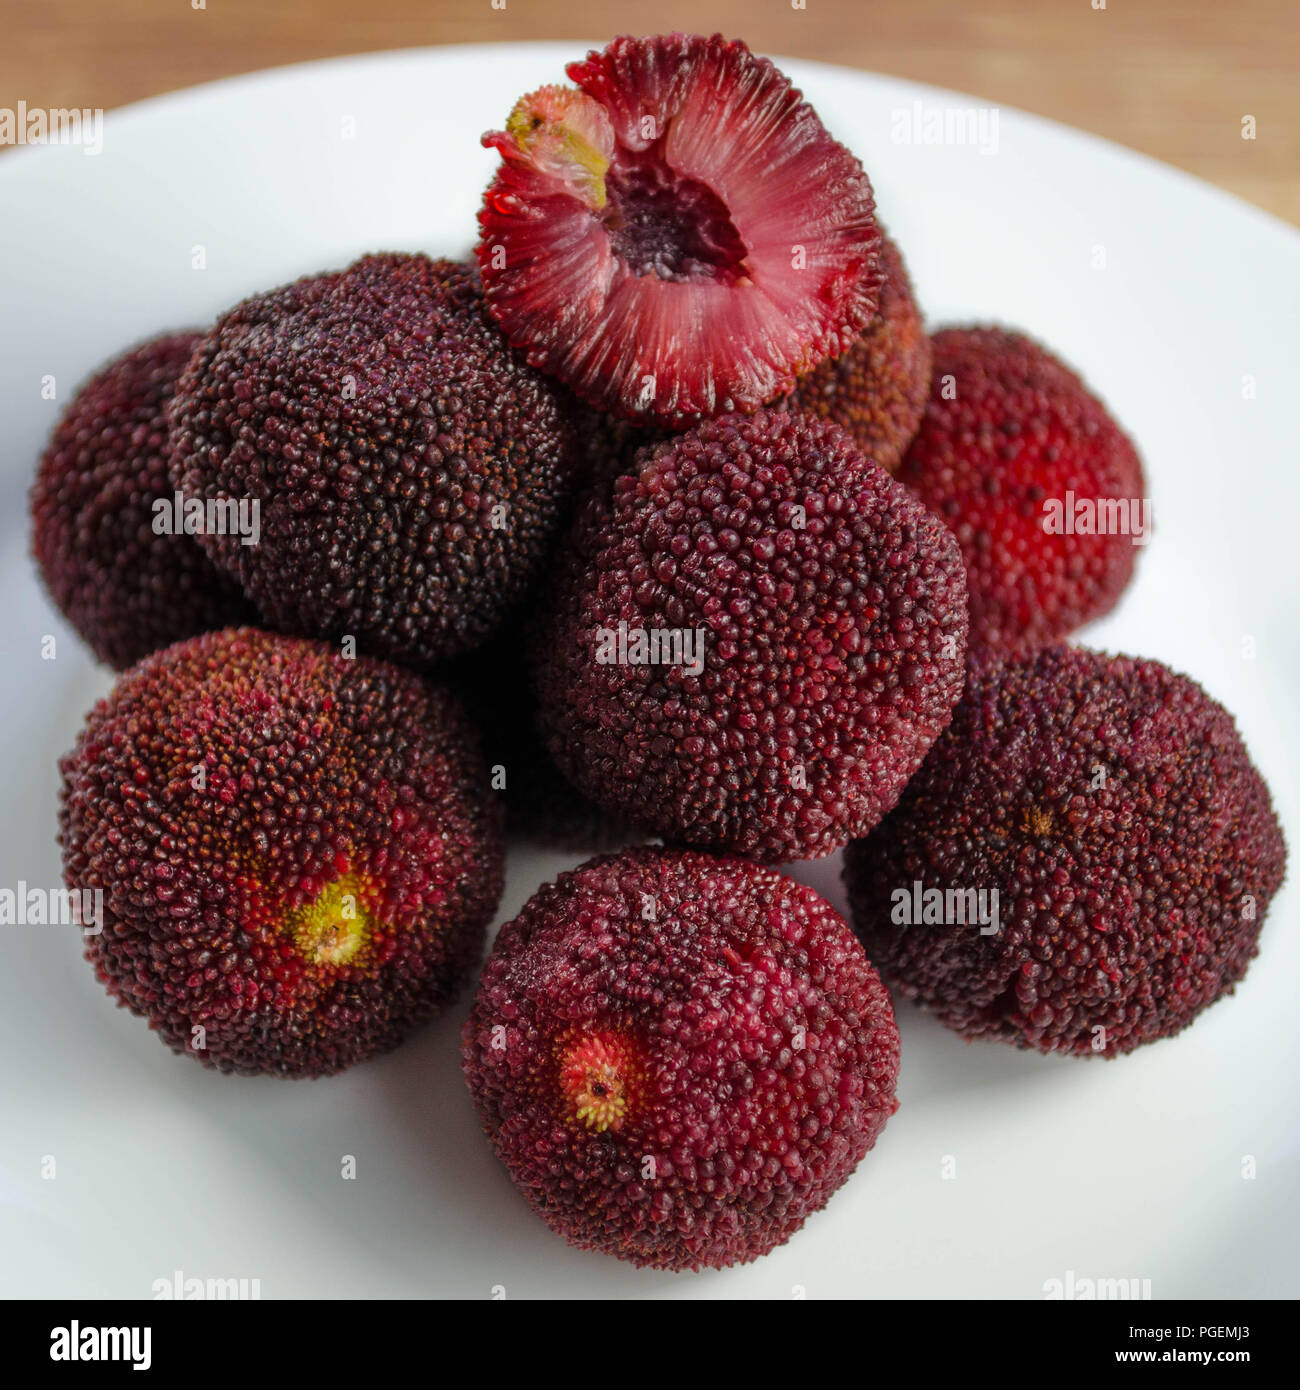 Chinese bayberries (Myrica rubra), aka yangmei, waxberry, or yamamomo.  Whole fruits and one cross-sectioned fruit are shown on a white plate. Stock Photo